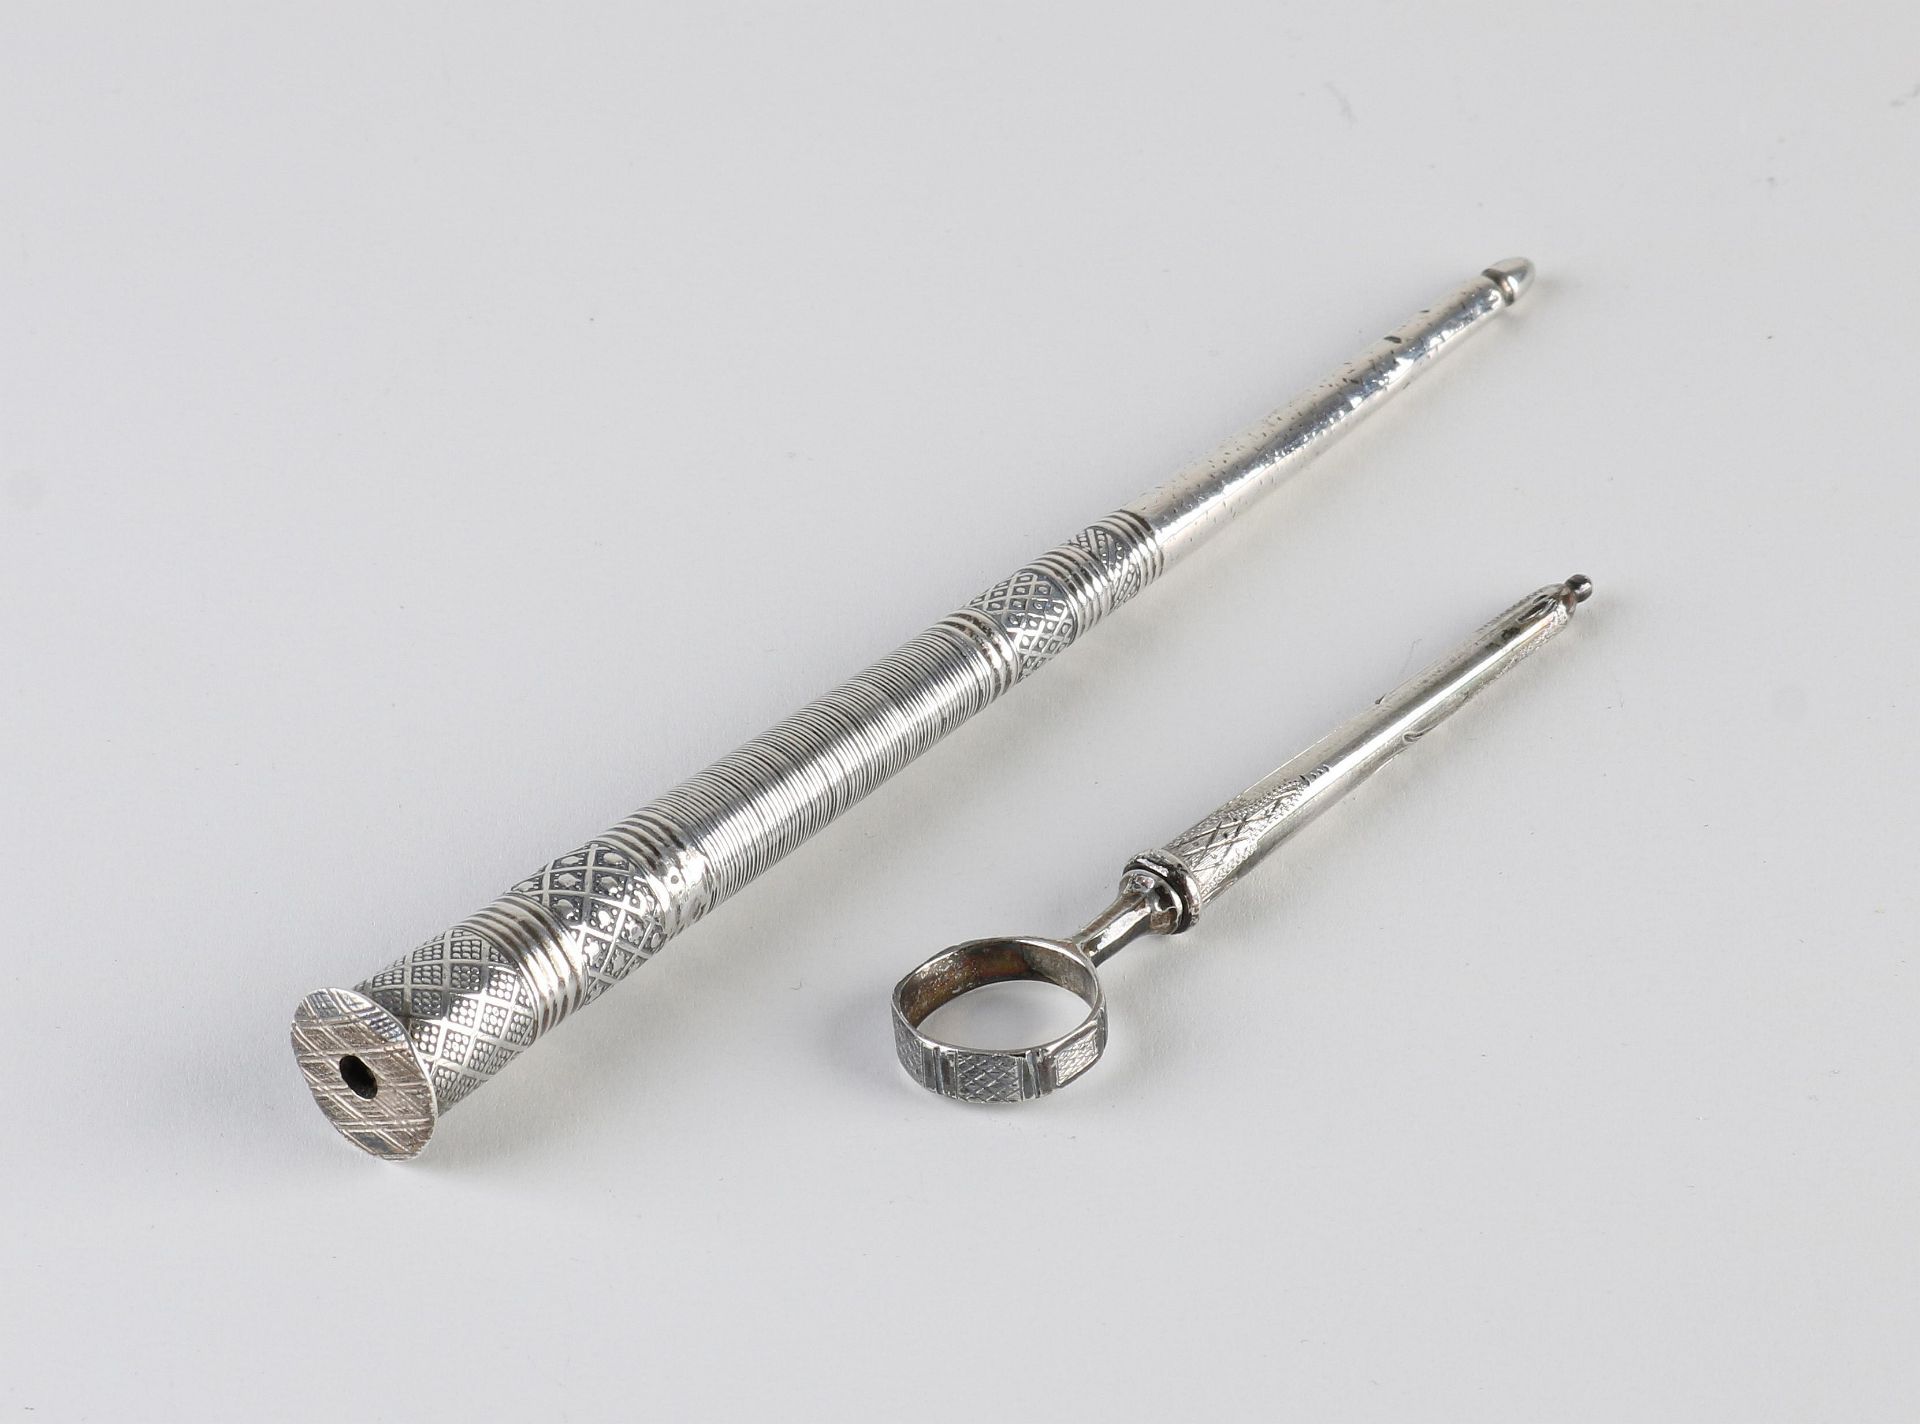 Silver knitting needle holder and awl